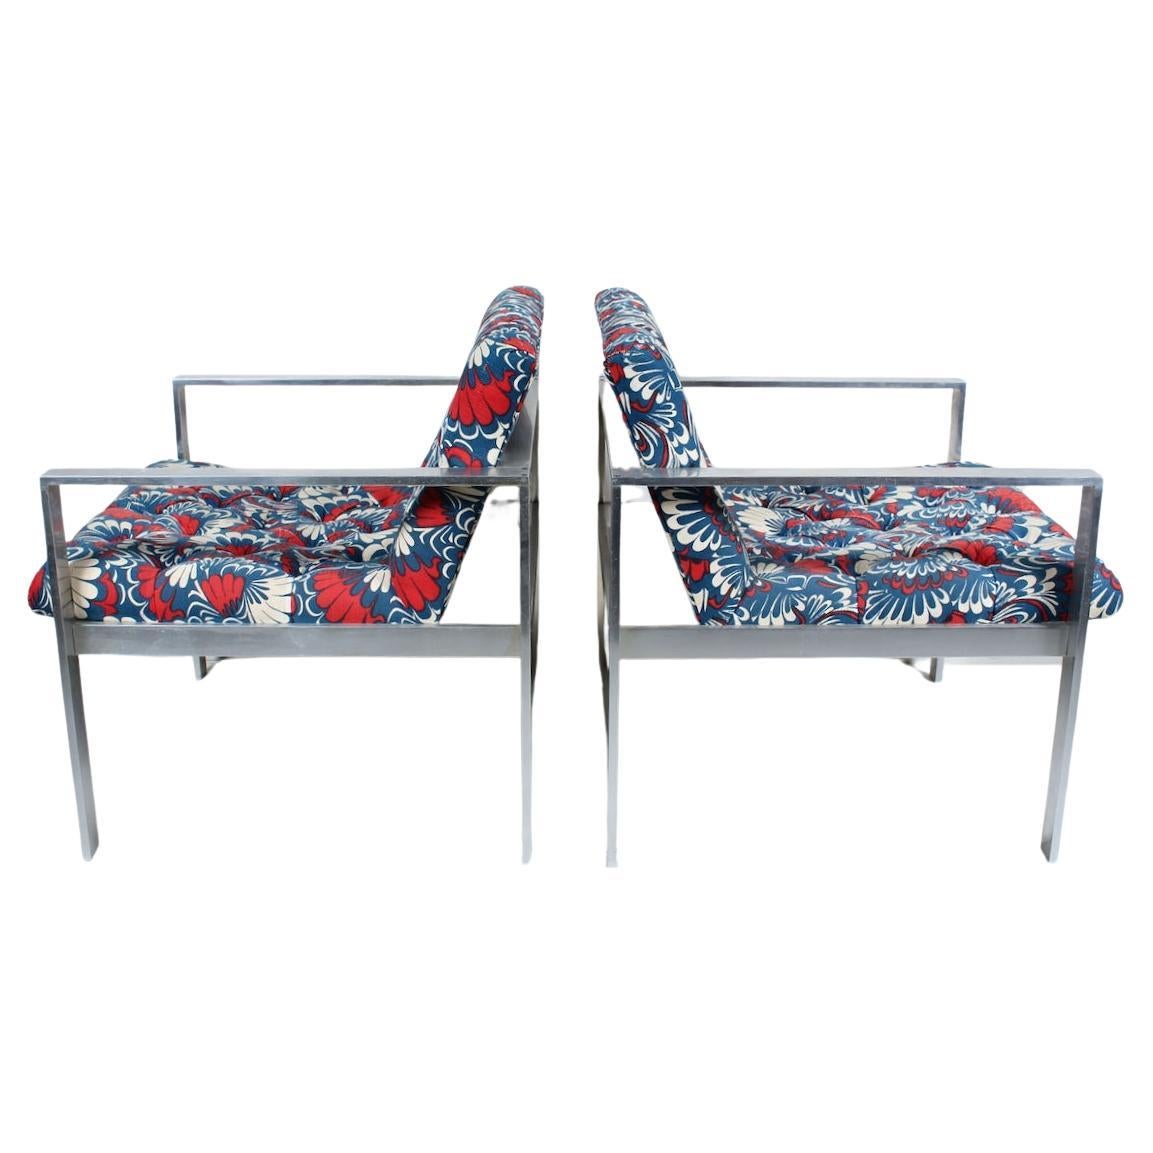 Pair of Harvey Probber 1427A Solid Bar Aluminum Lounge Chairs. Featuring solid Aluminum bar construction, ergonomic slant back, attached spacious cushions, with tufted Blue, Red, White Mod floral cotton fabric - upholstery believed to be original.